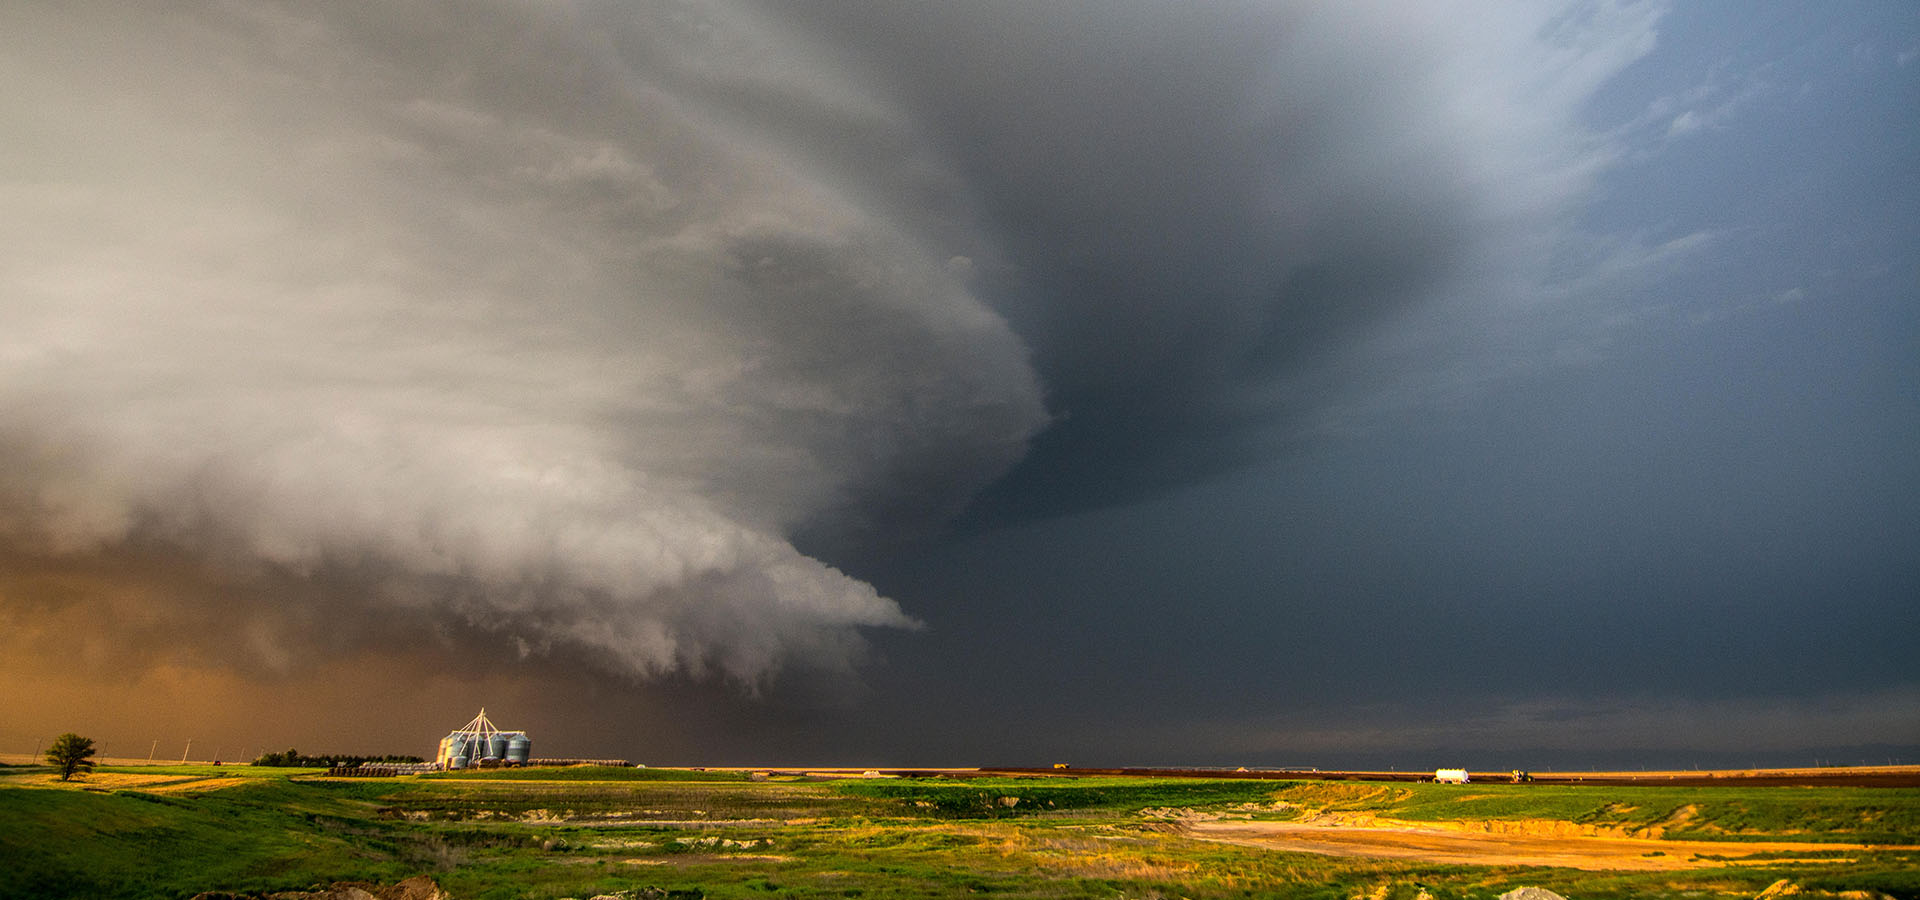 A tornado-producing supercell thunderstorm spinning over ranch land at sunset near Leoti, Kansas